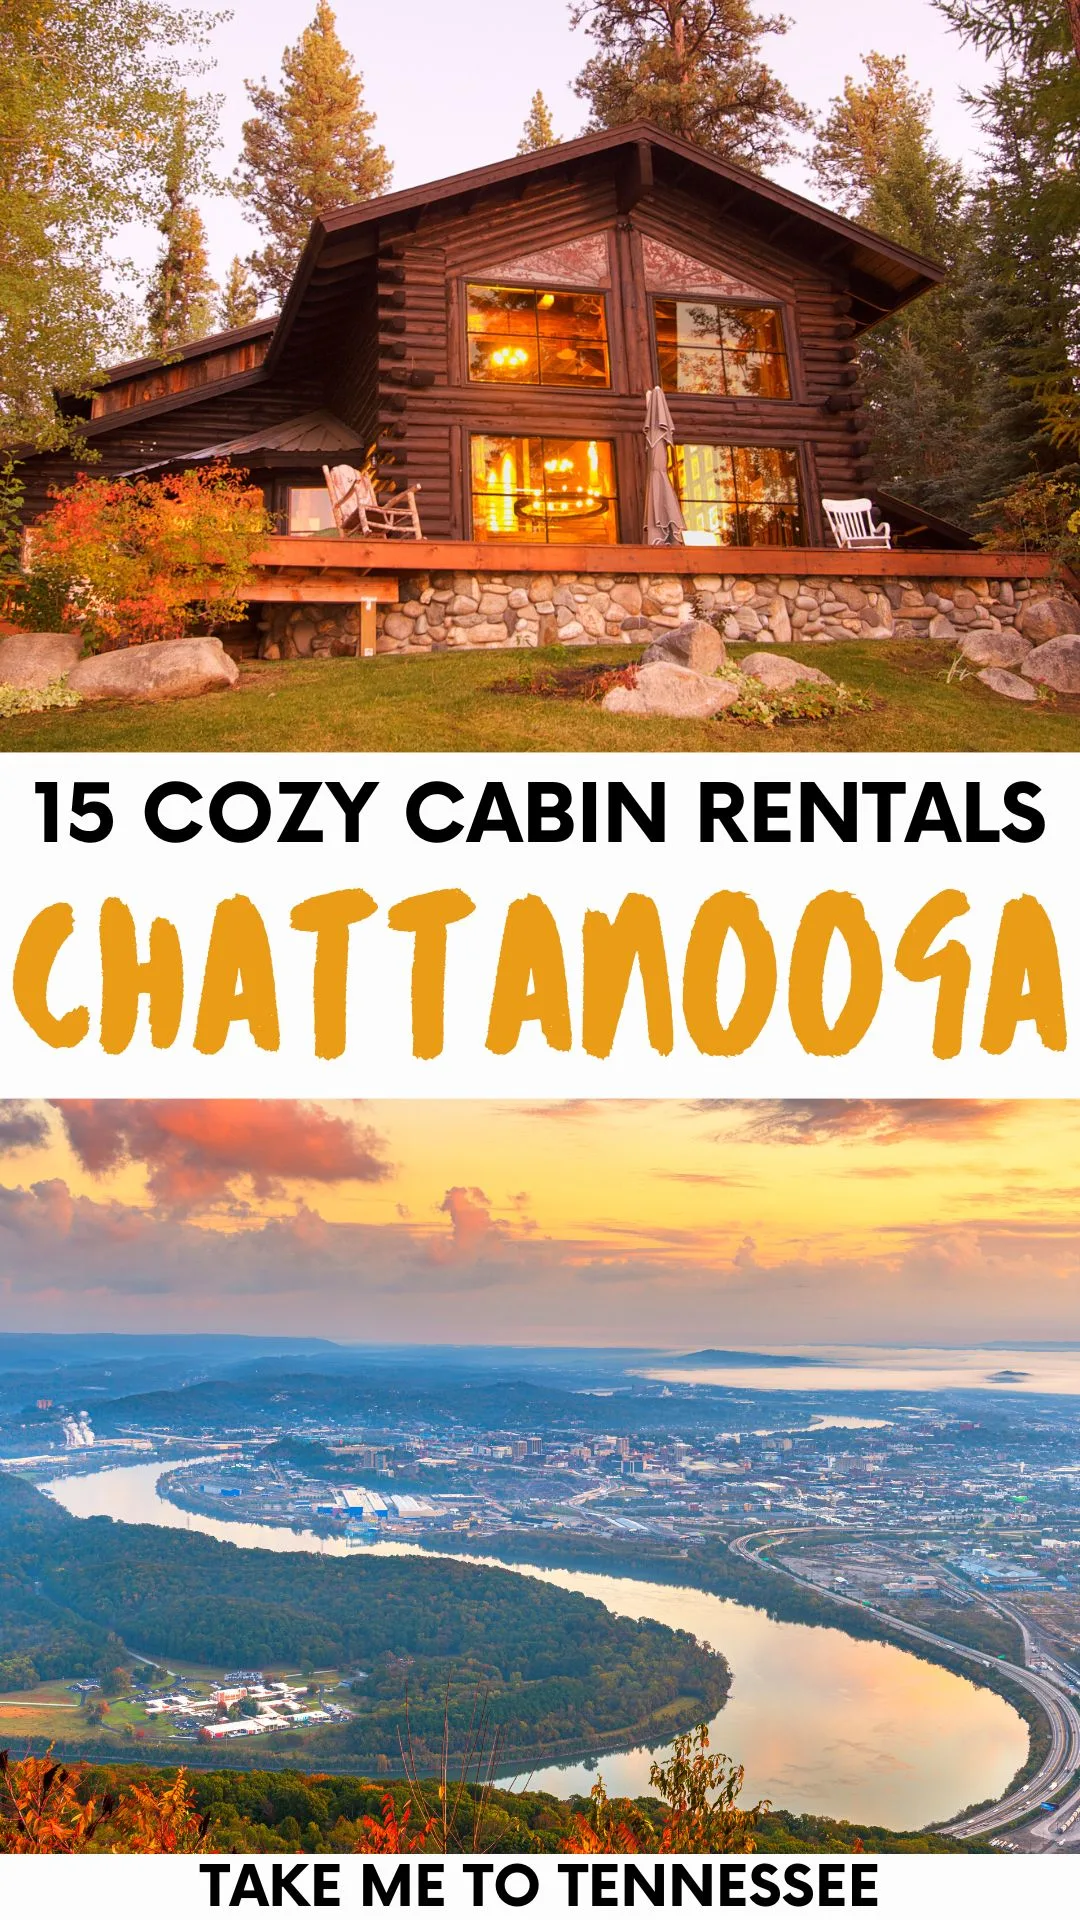 Gallery images with cabin and Scenic City of Chattanooga in southeast TN.